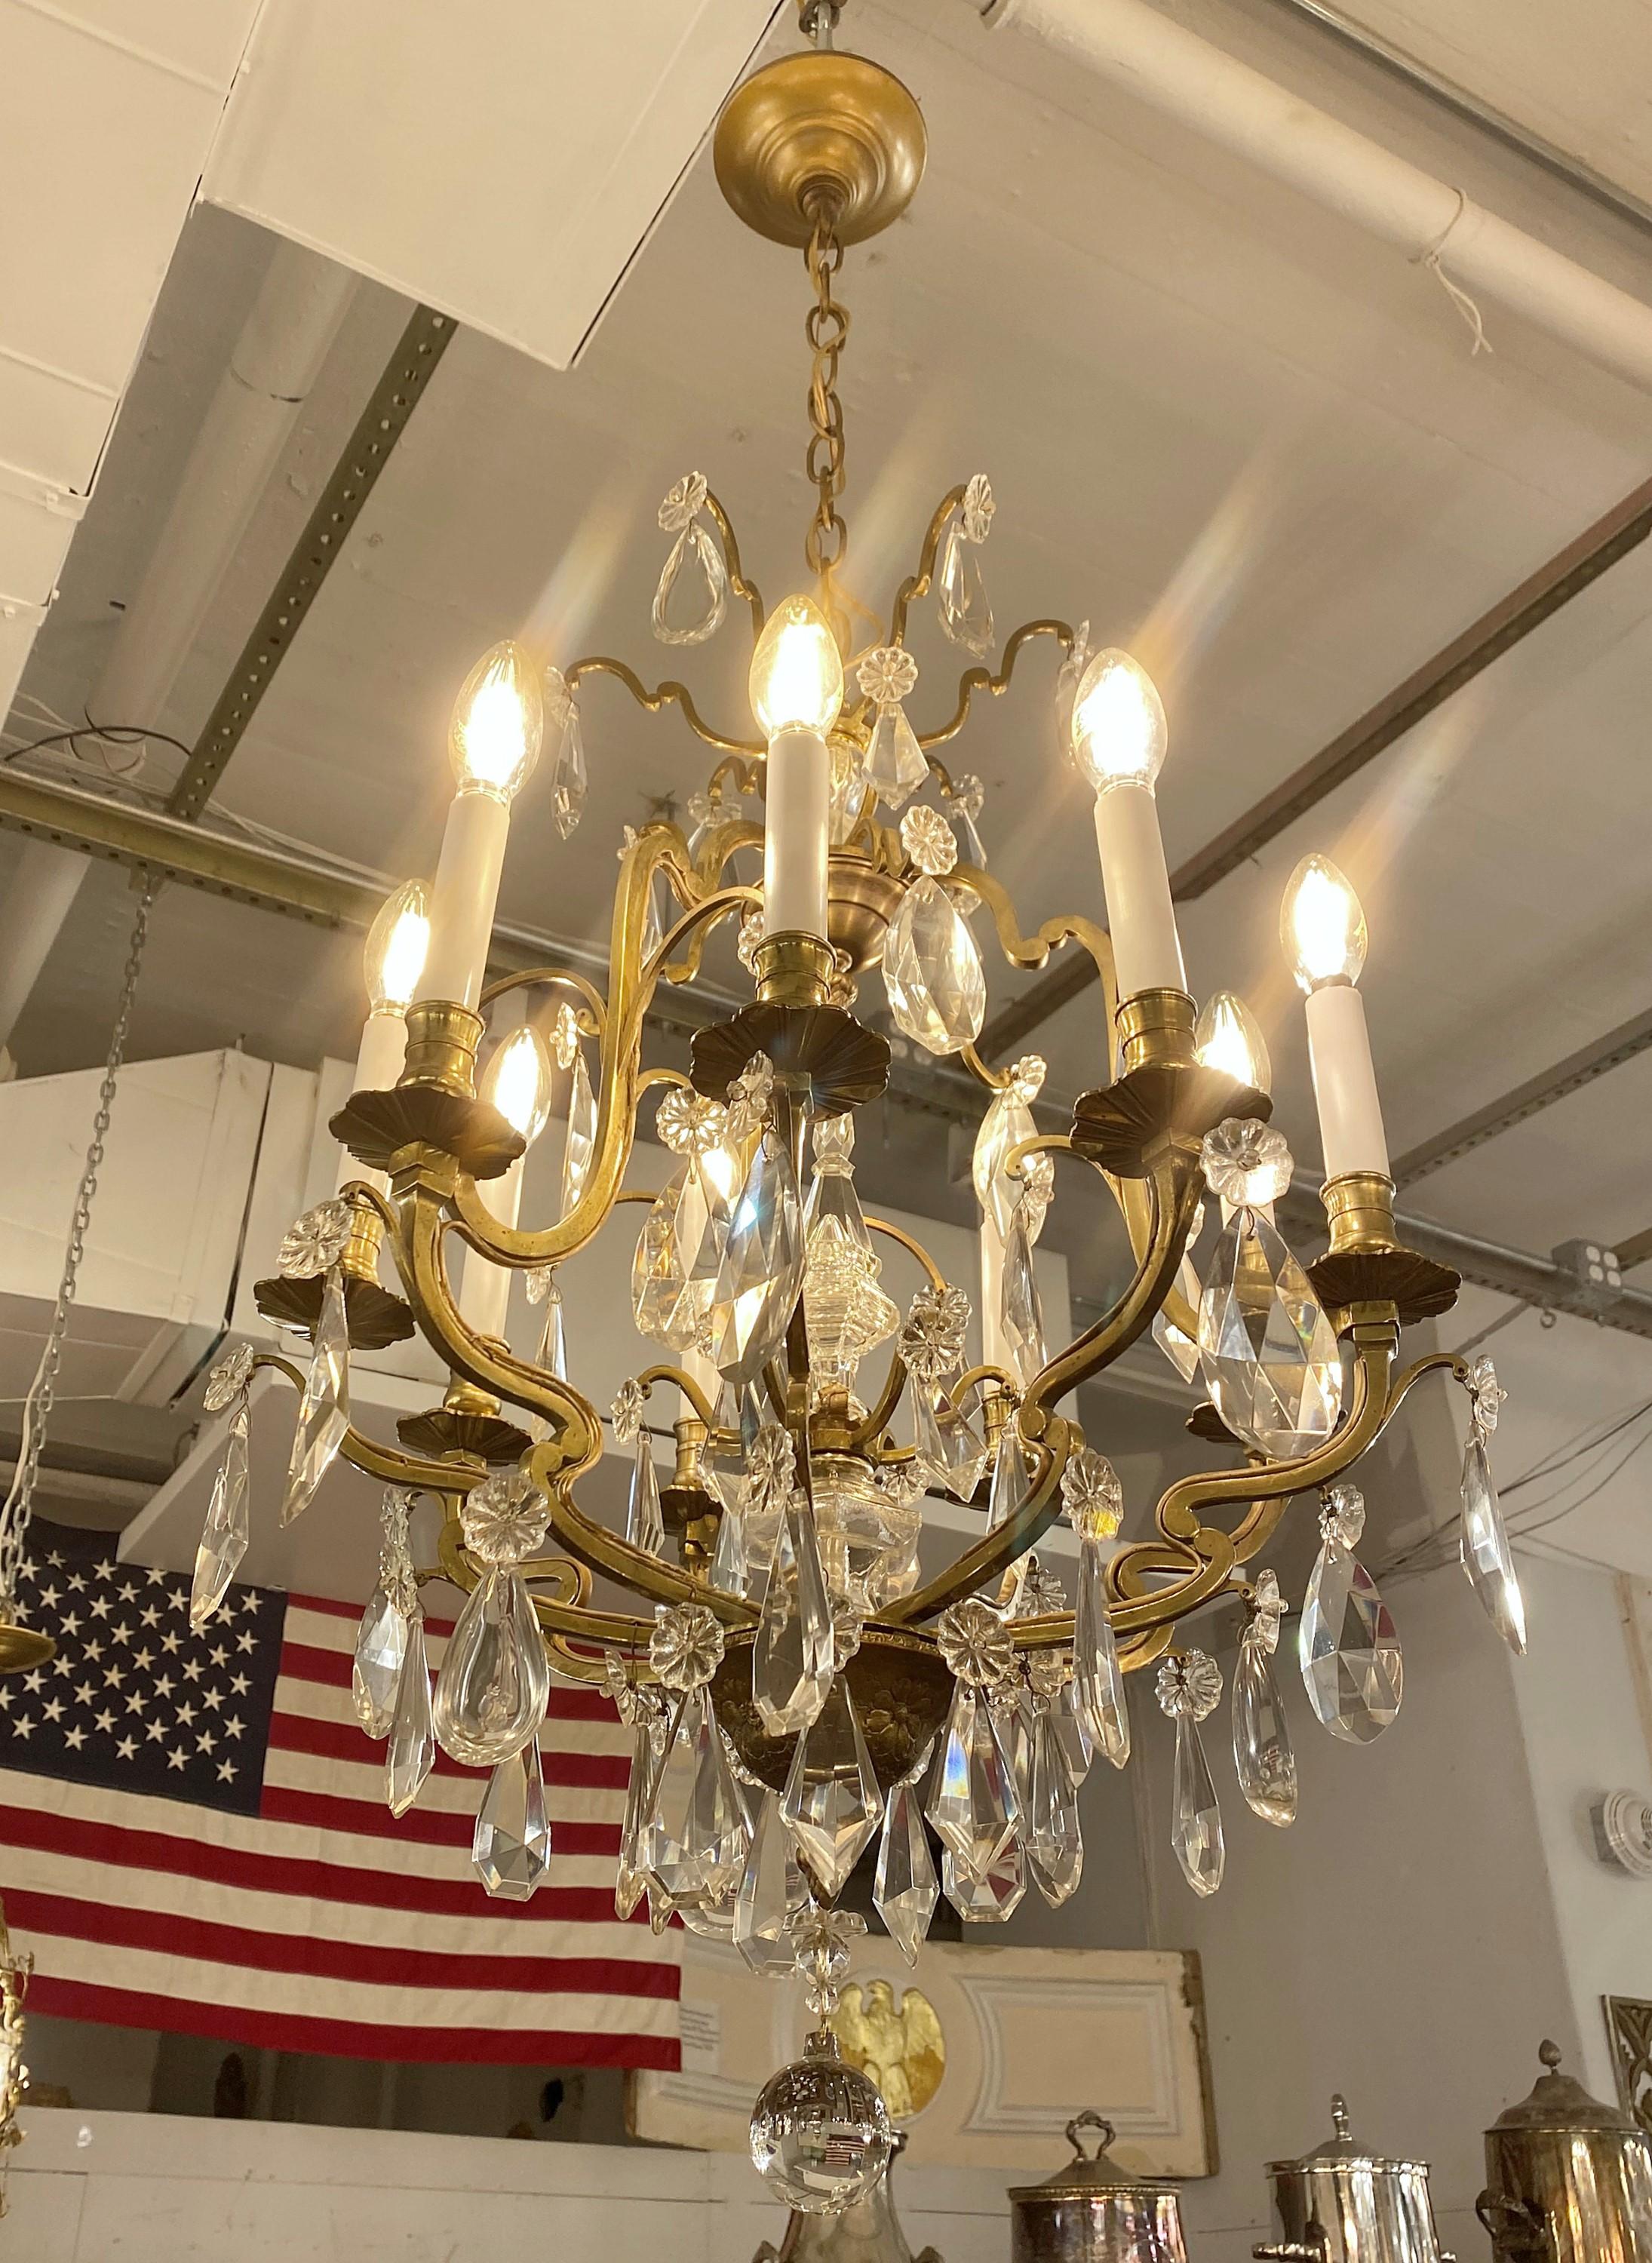 20th century petit bronze and crystal chandelier done in a Louis XV style. Loaded with crystals. Takes 9 normal chandelier style light bulbs. Cleaned and restored. This light is wired and ready to ship. Please note, this item is located in one of